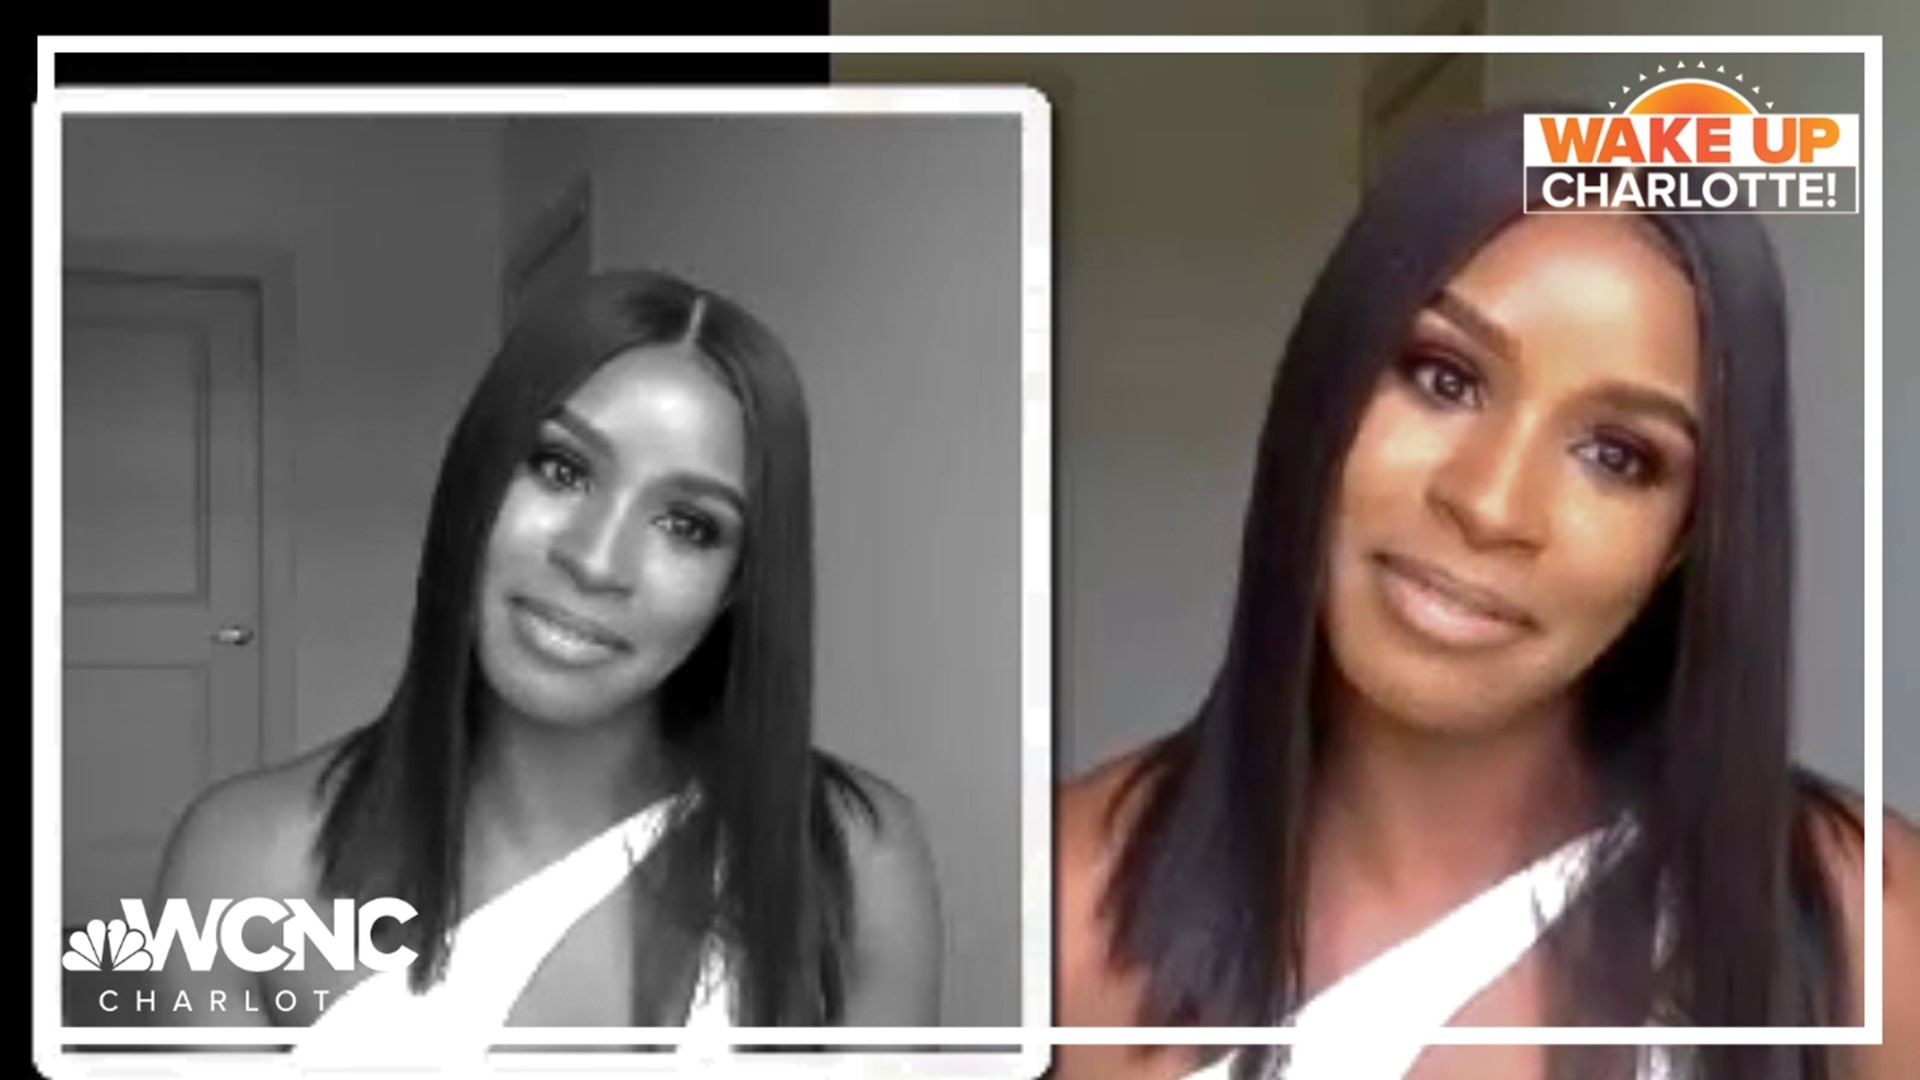 Dasja Johnson joined Love Island USA as a "bombshell" for the famous "Casa Amor" week. Here's what she told WCNC Charlotte about her experience on the popular show.